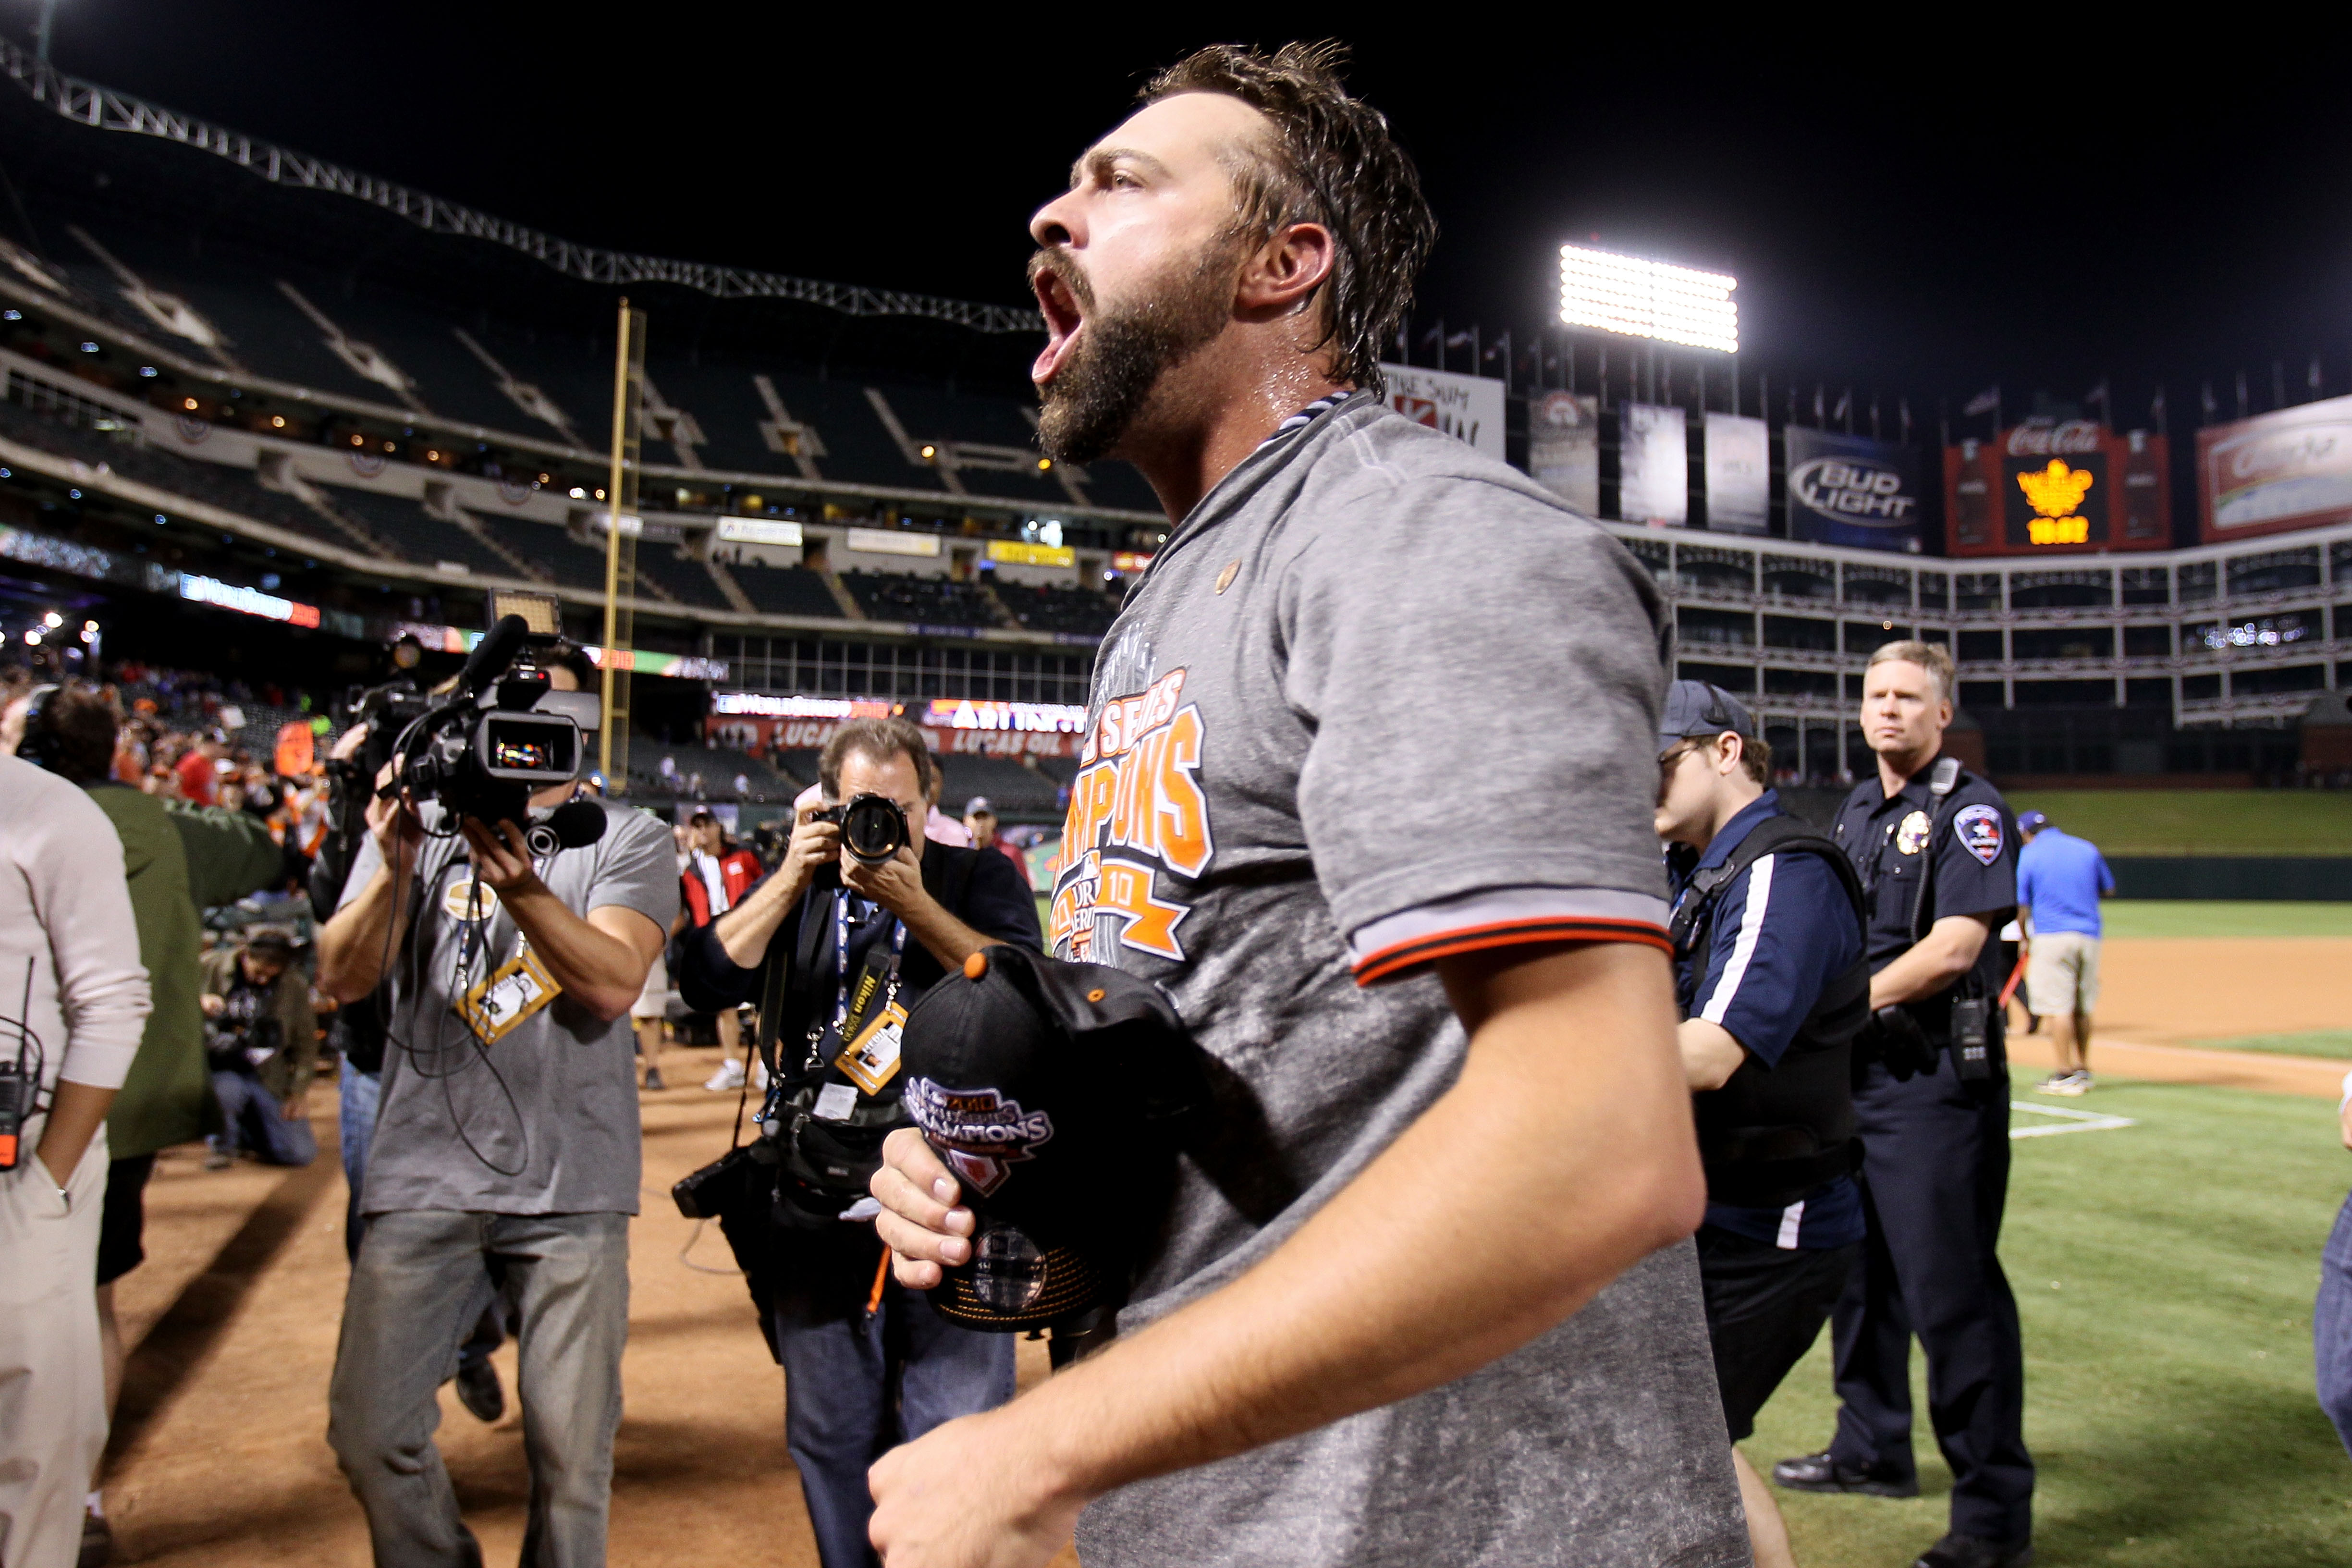 San Francisco Braces For Giants' World Series Champs Parade